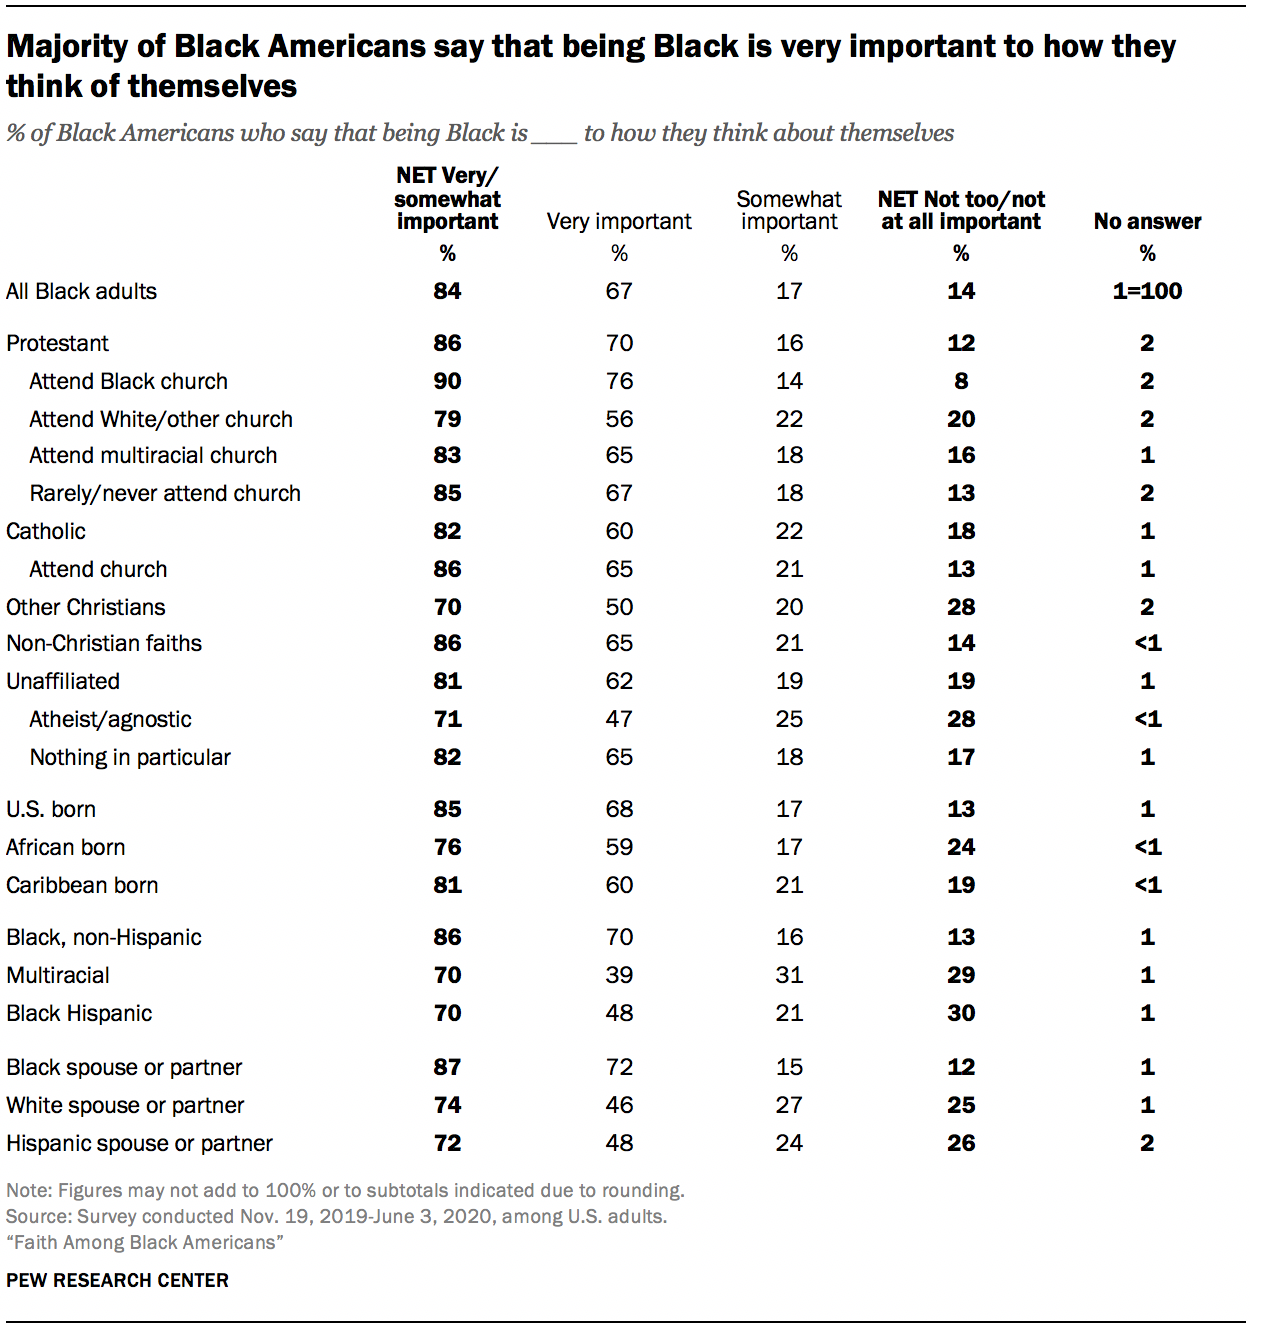 Majority of Black Americans say that being Black is very important to how they think of themselves